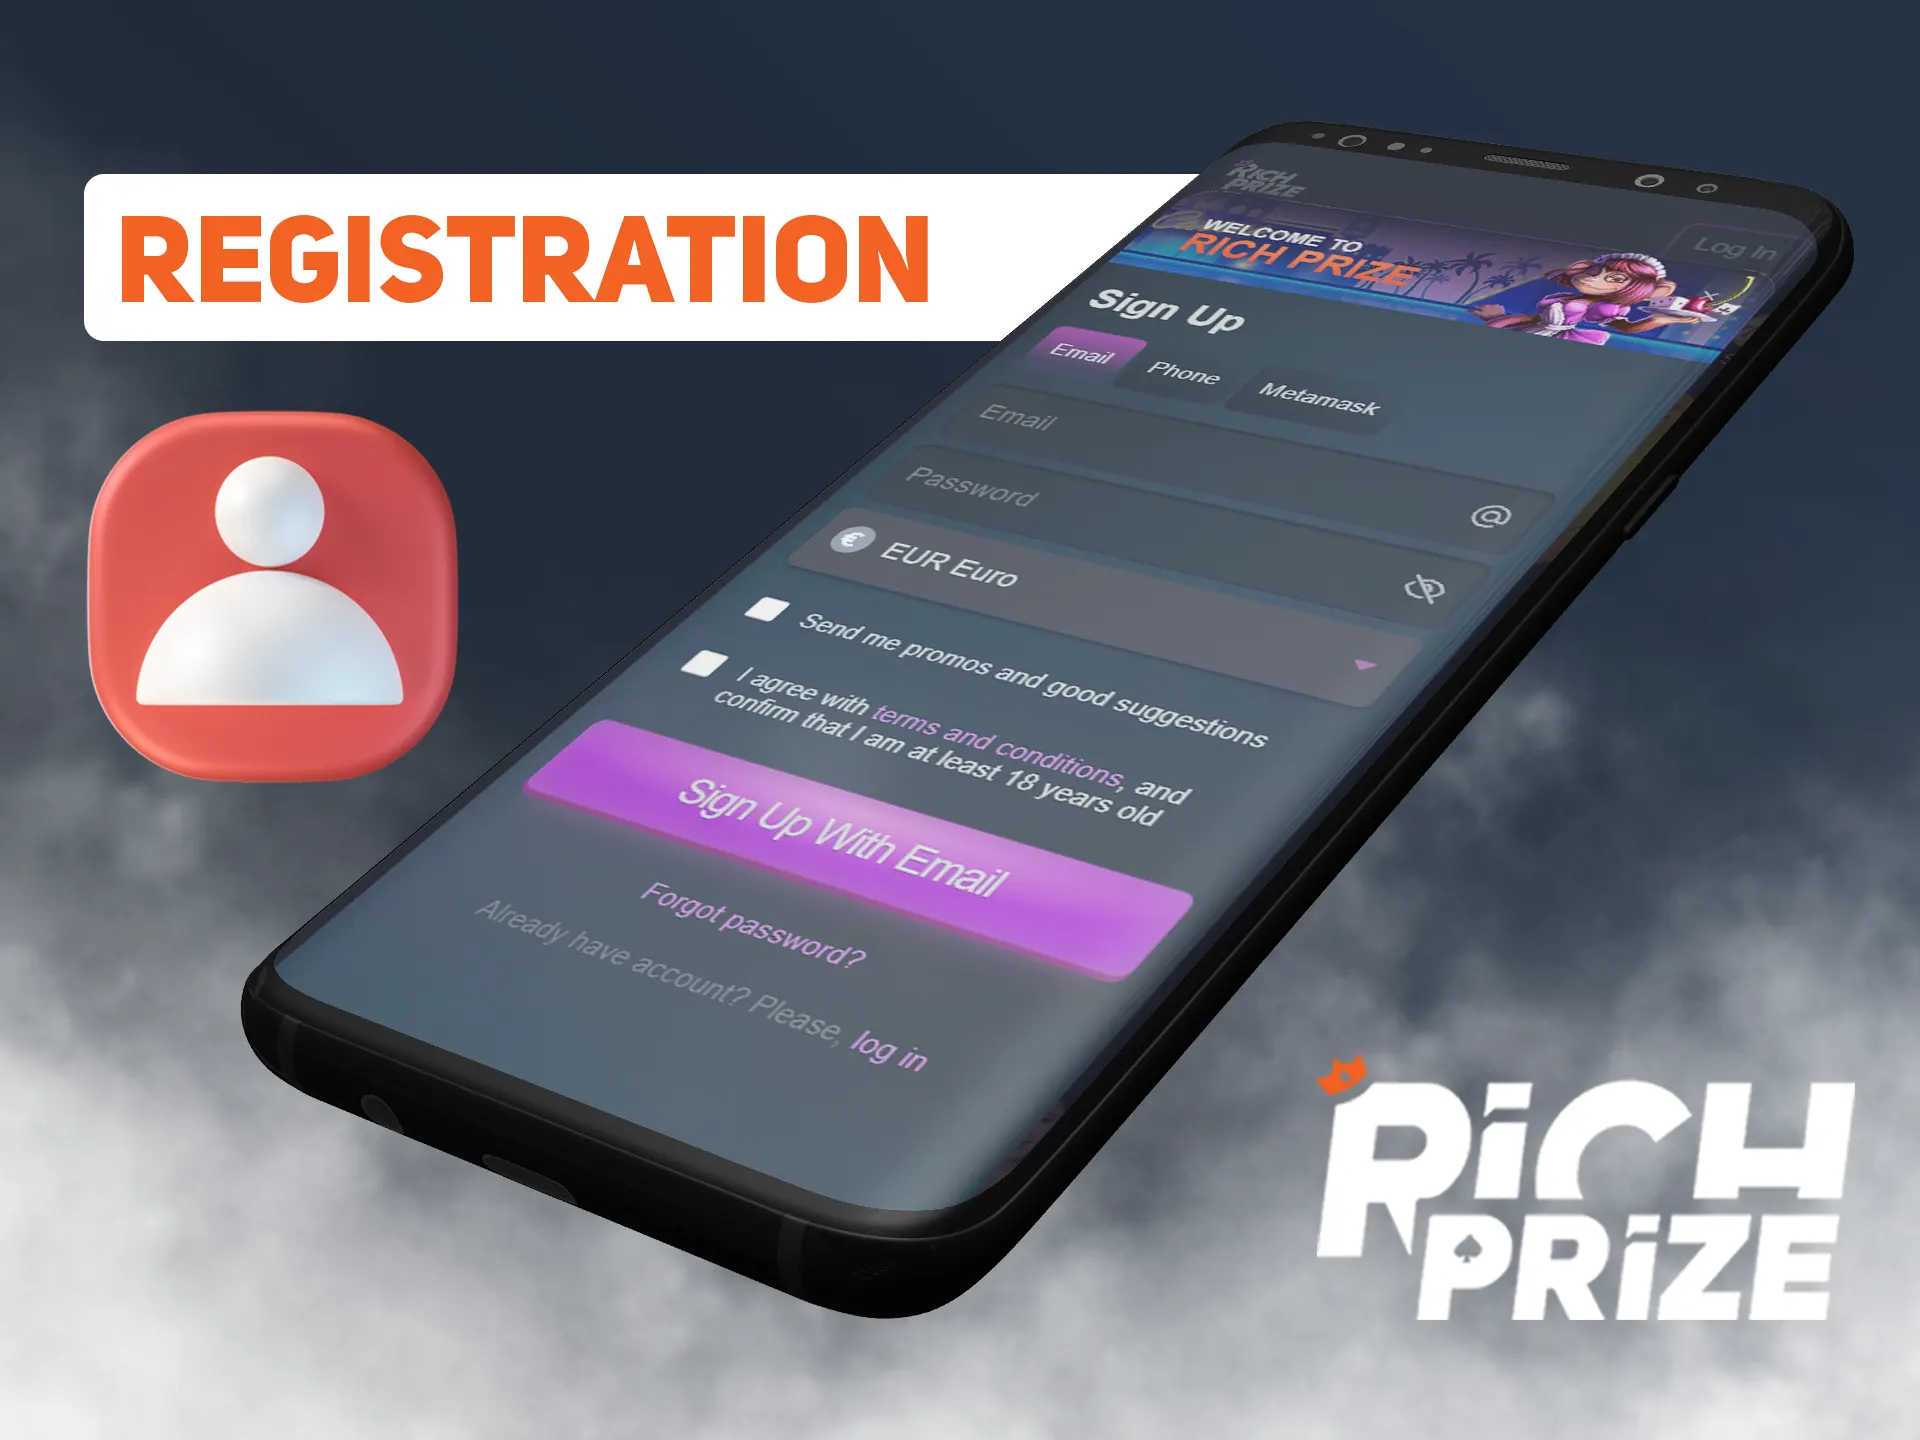 Fill all of the required fields for complete Richprize registration.